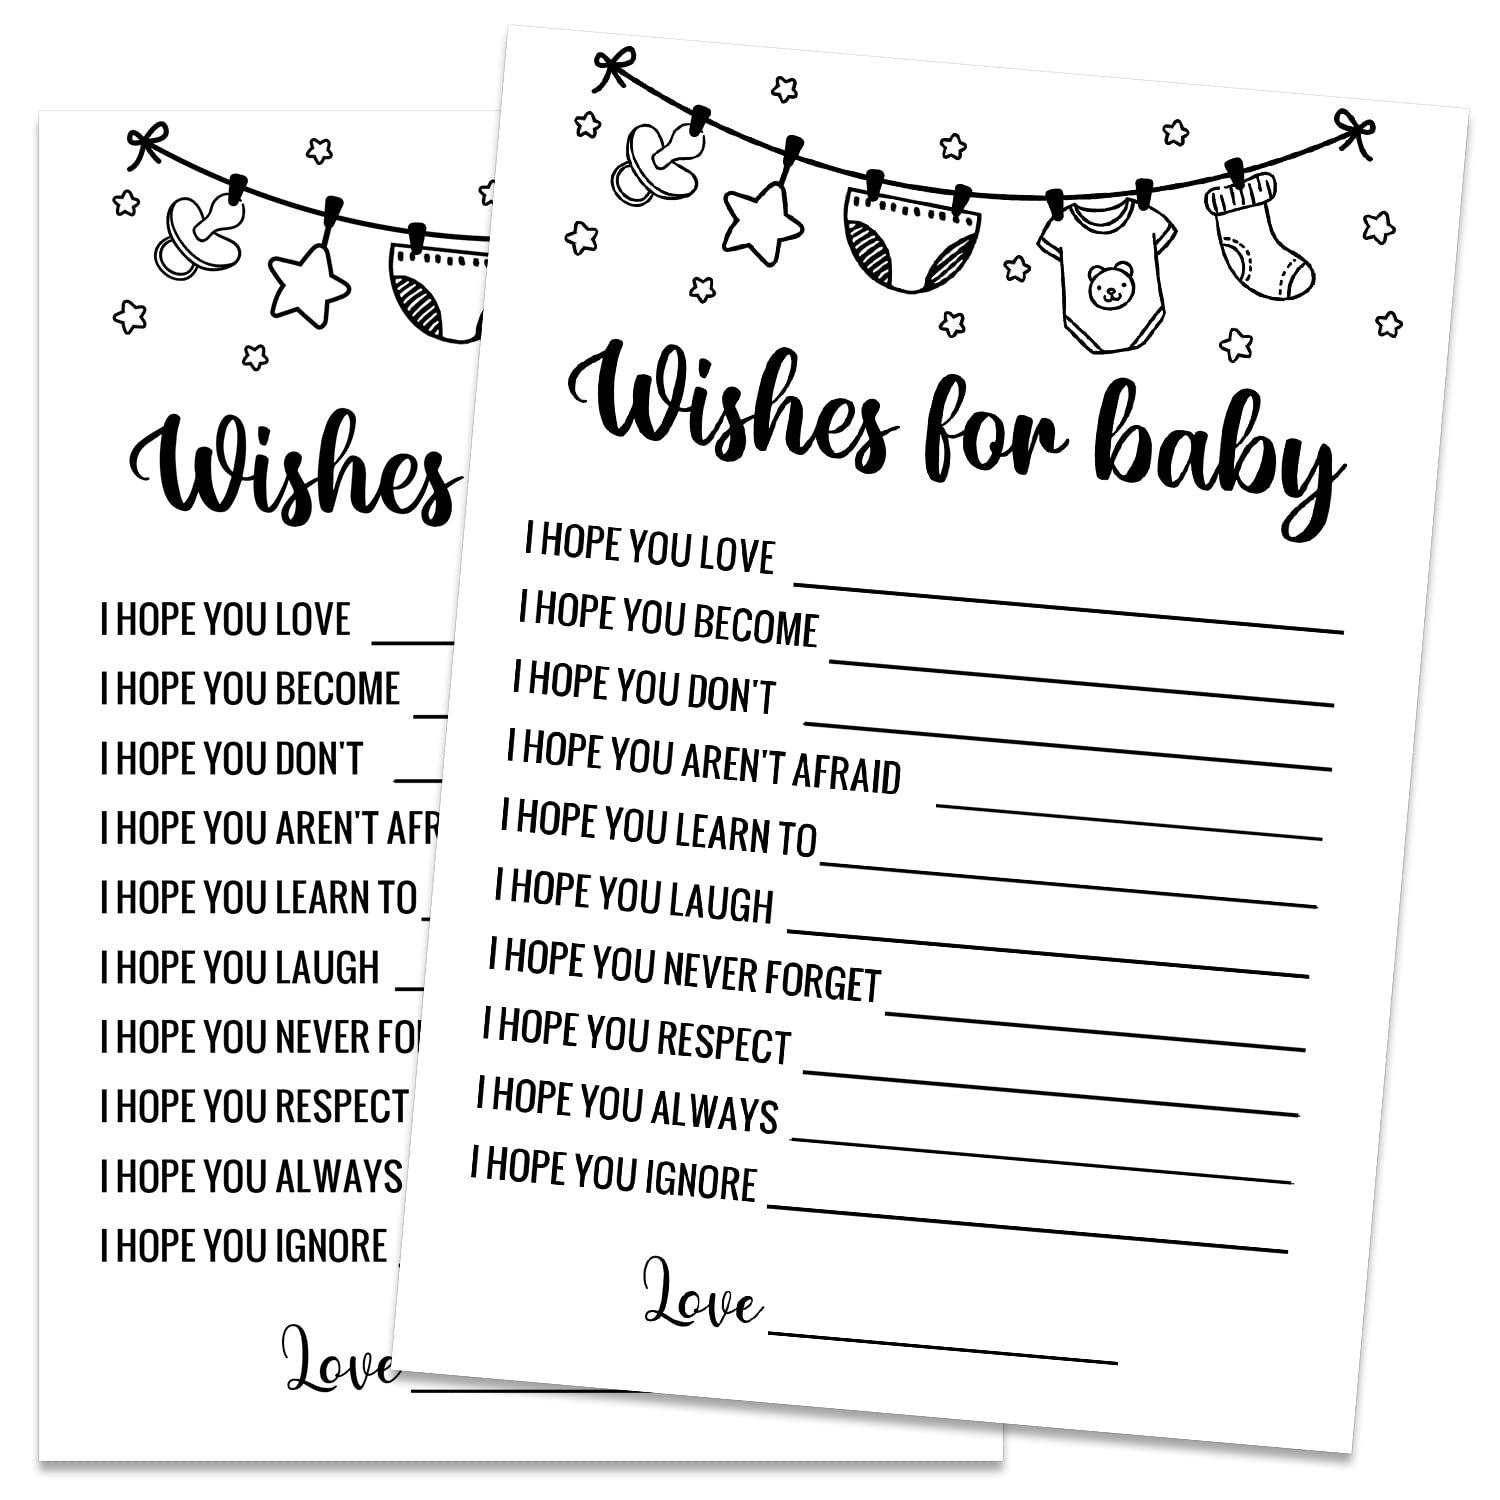 Amazon Baby Advice Cards Wishes For Baby Cards Baby Shower Game Gender Reveal Party Supplies Baby Shower Decorations Baby Shower Party Games Supplies Activities 30 Game Cards Included Home Kitchen - Free Printable Baby Advice Cards